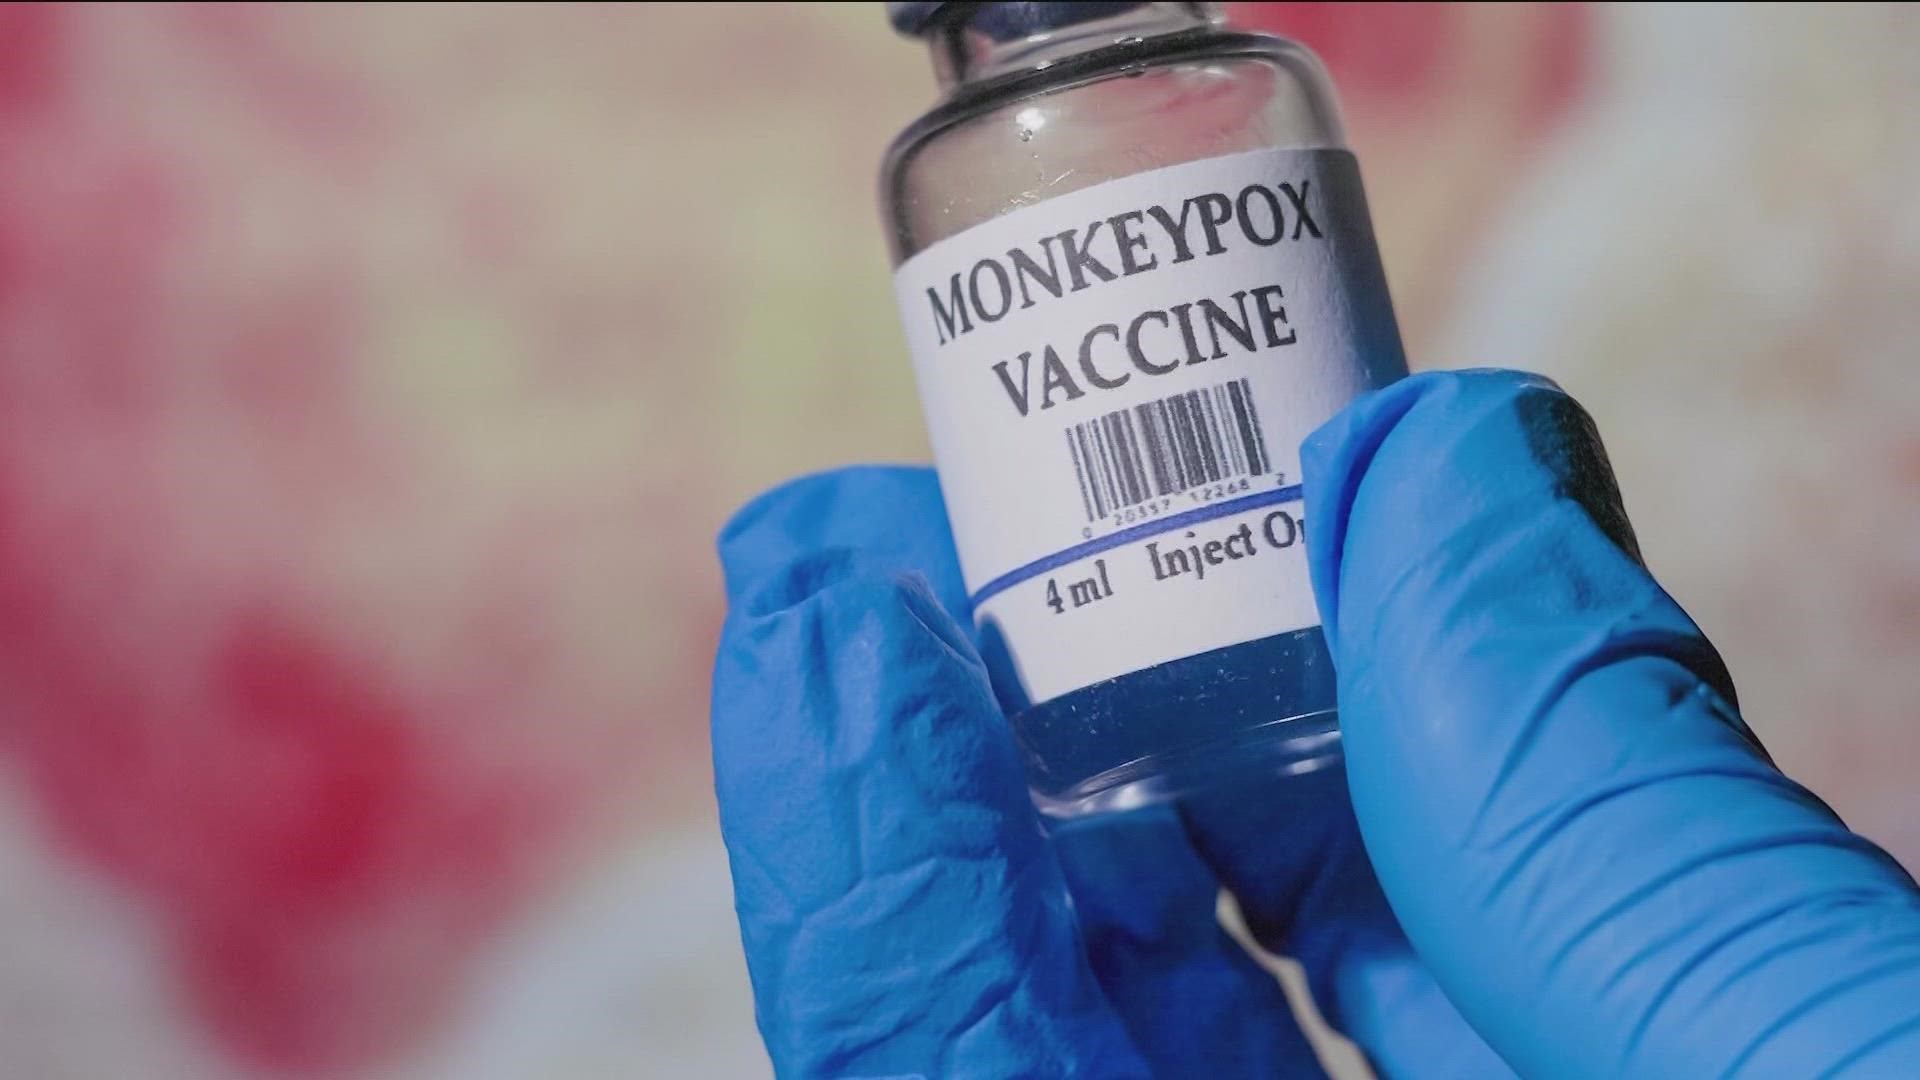 More than 12,000 doses of the monkeypox vaccine are scheduled to arrive in Texas on Friday and next week.